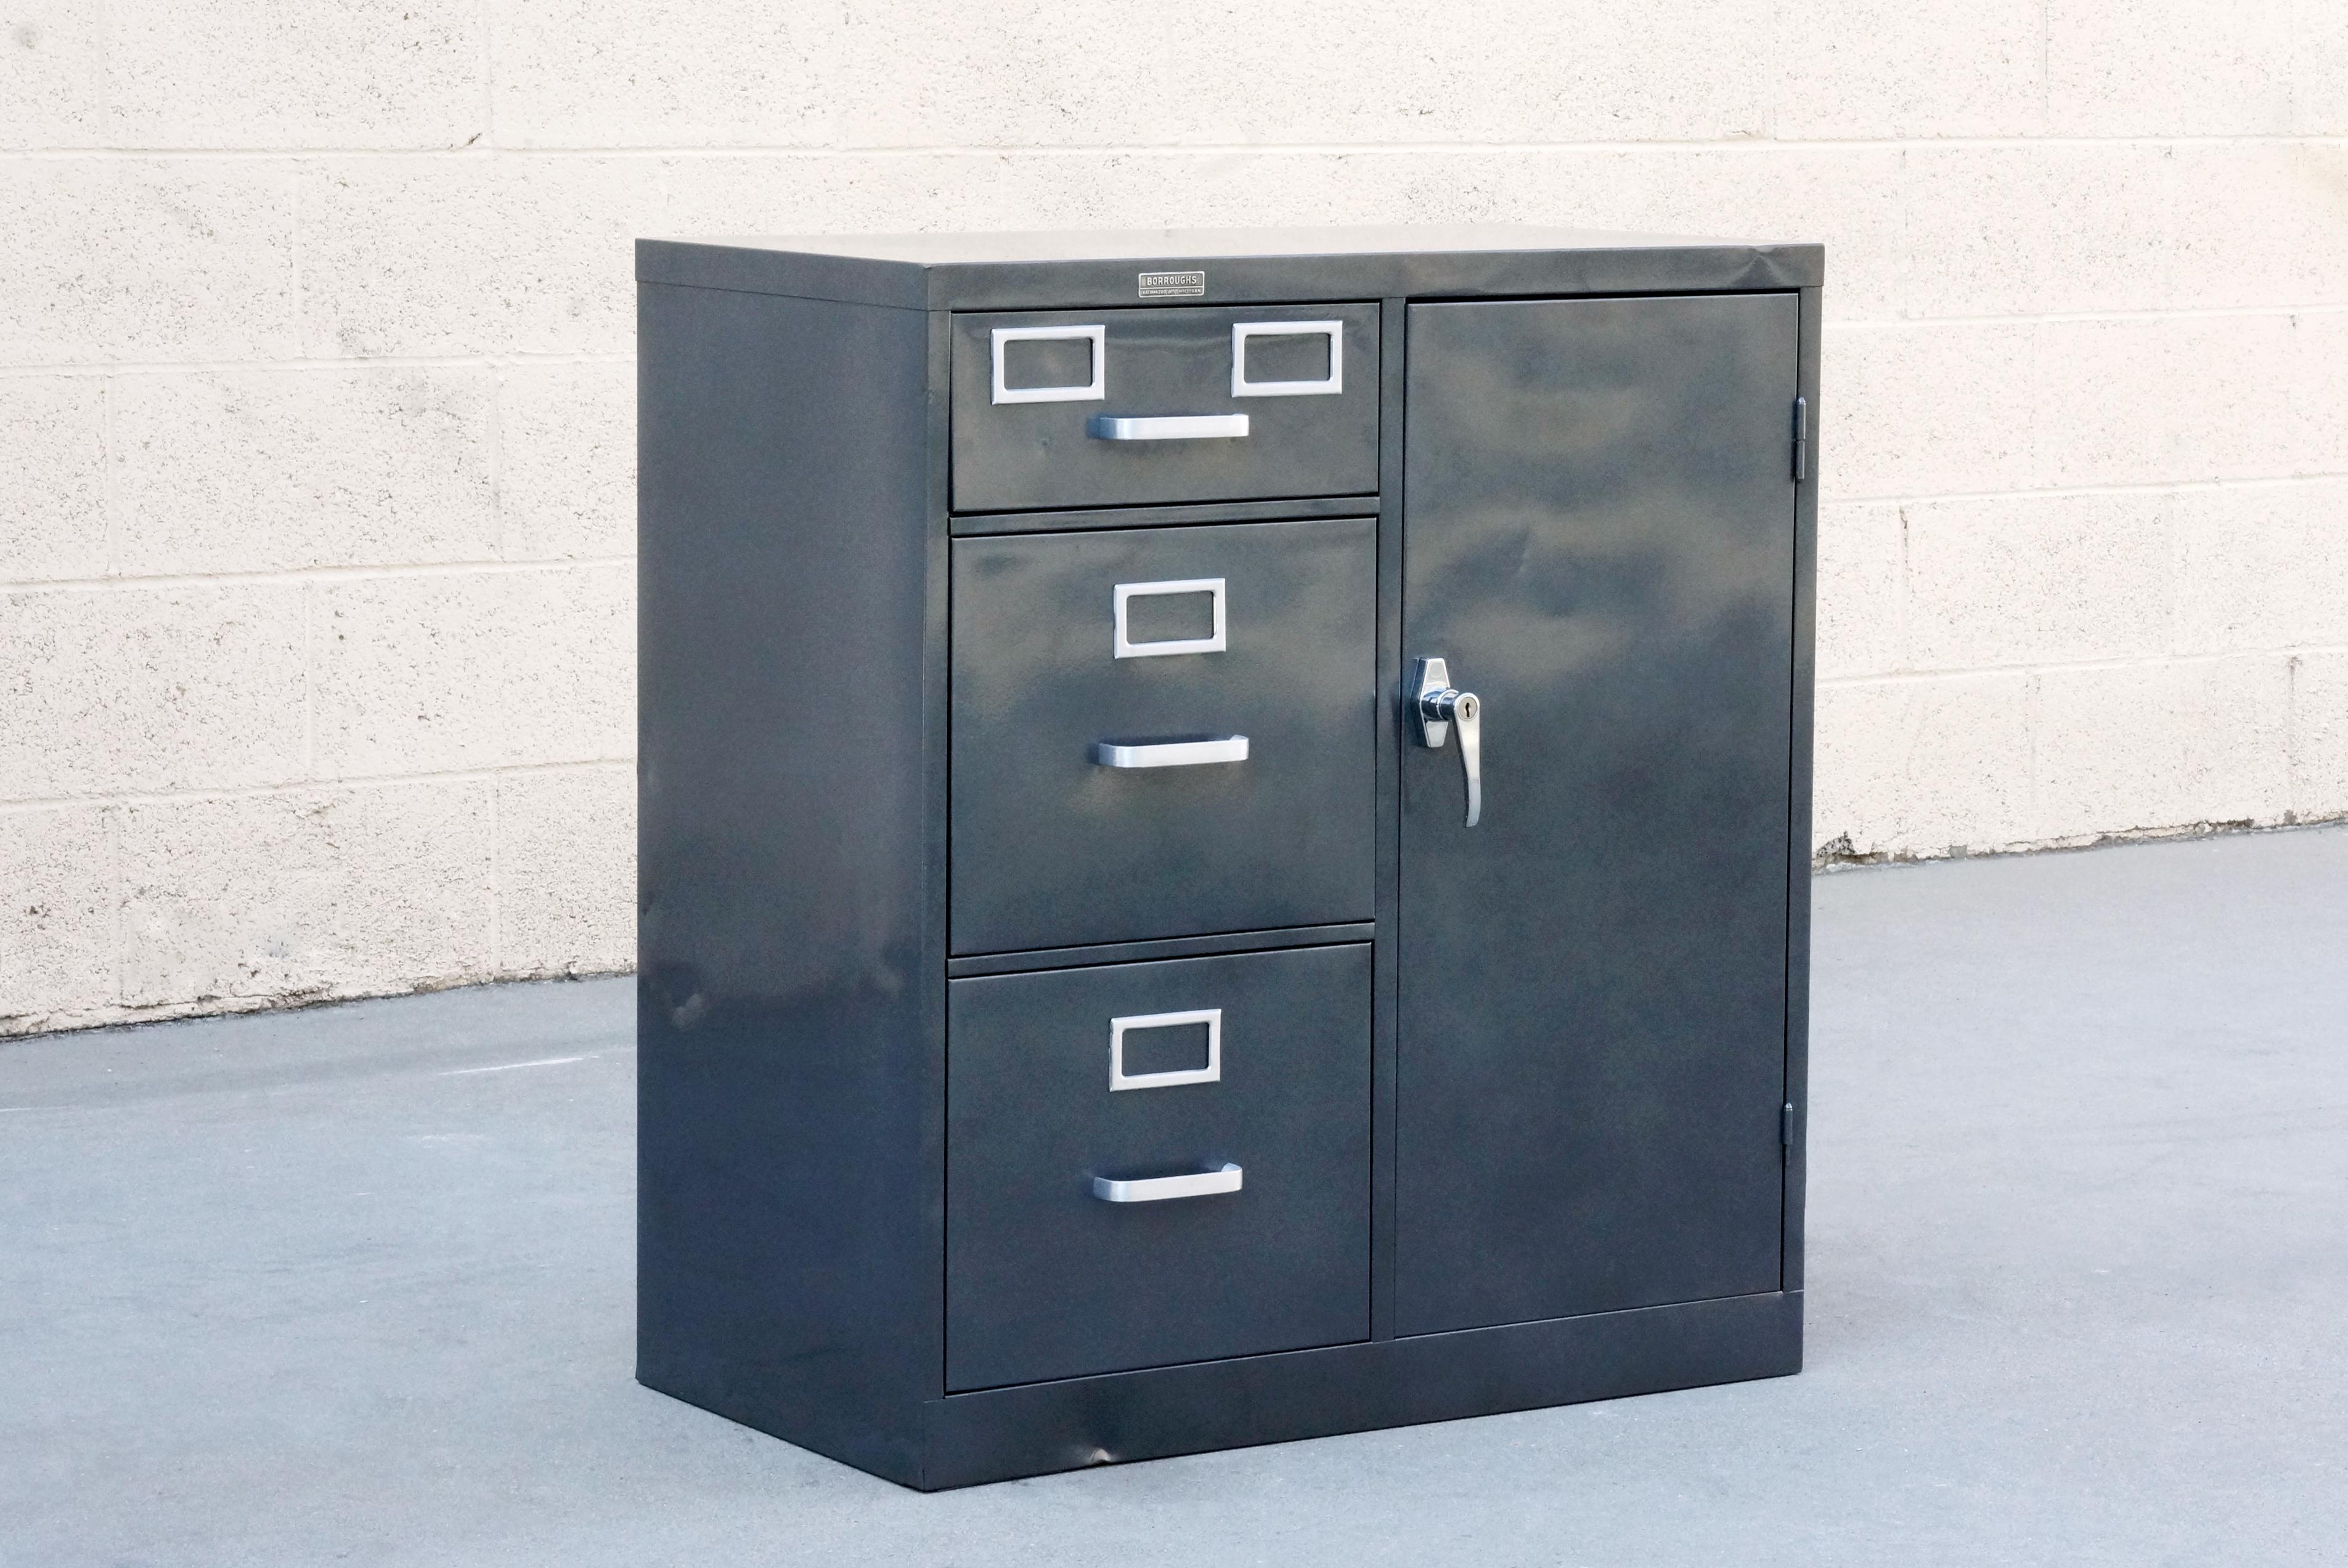 Classic American industrial safe cabinet by Borroughs, circa 1960s. We refinished this heavy duty steel piece in metallic grey (GR02) and brushed out the aluminum hardware to accentuate its All-American industrial styling. Fully-functional; key and